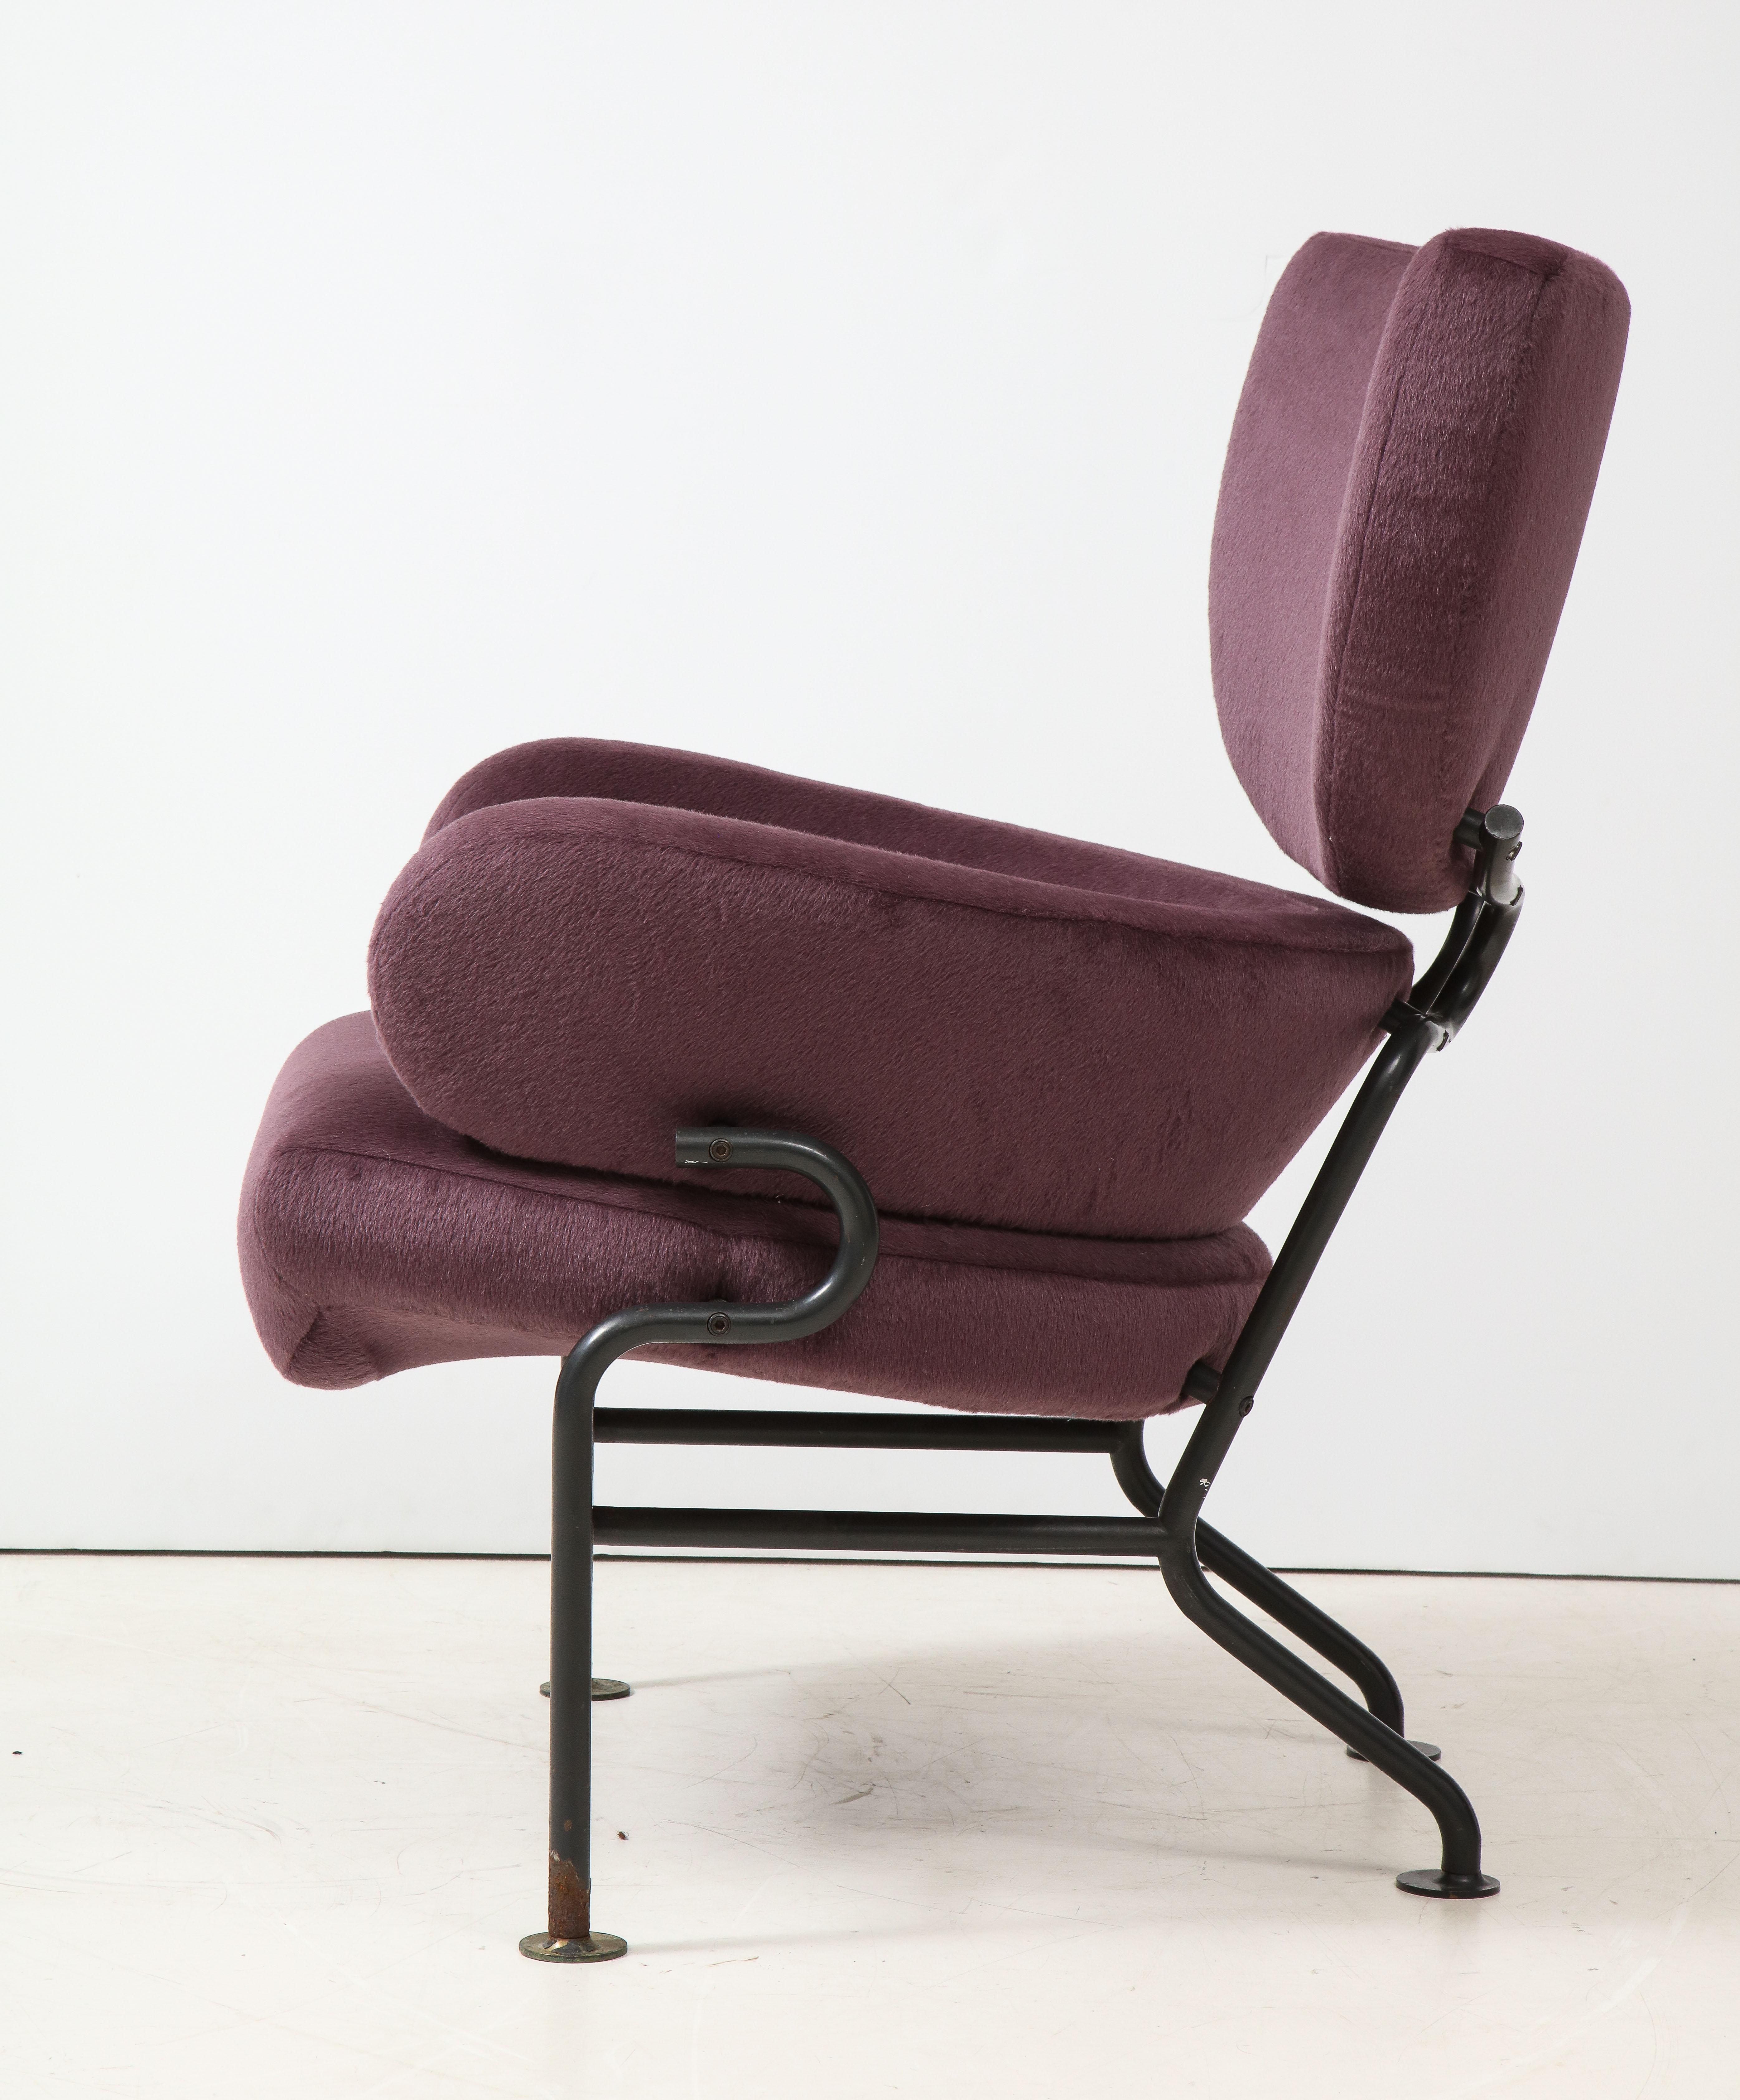 Lacquered Purple Alpaca Model Pl 19 Armchair by Franco Albini, Italy, c. 1959 For Sale